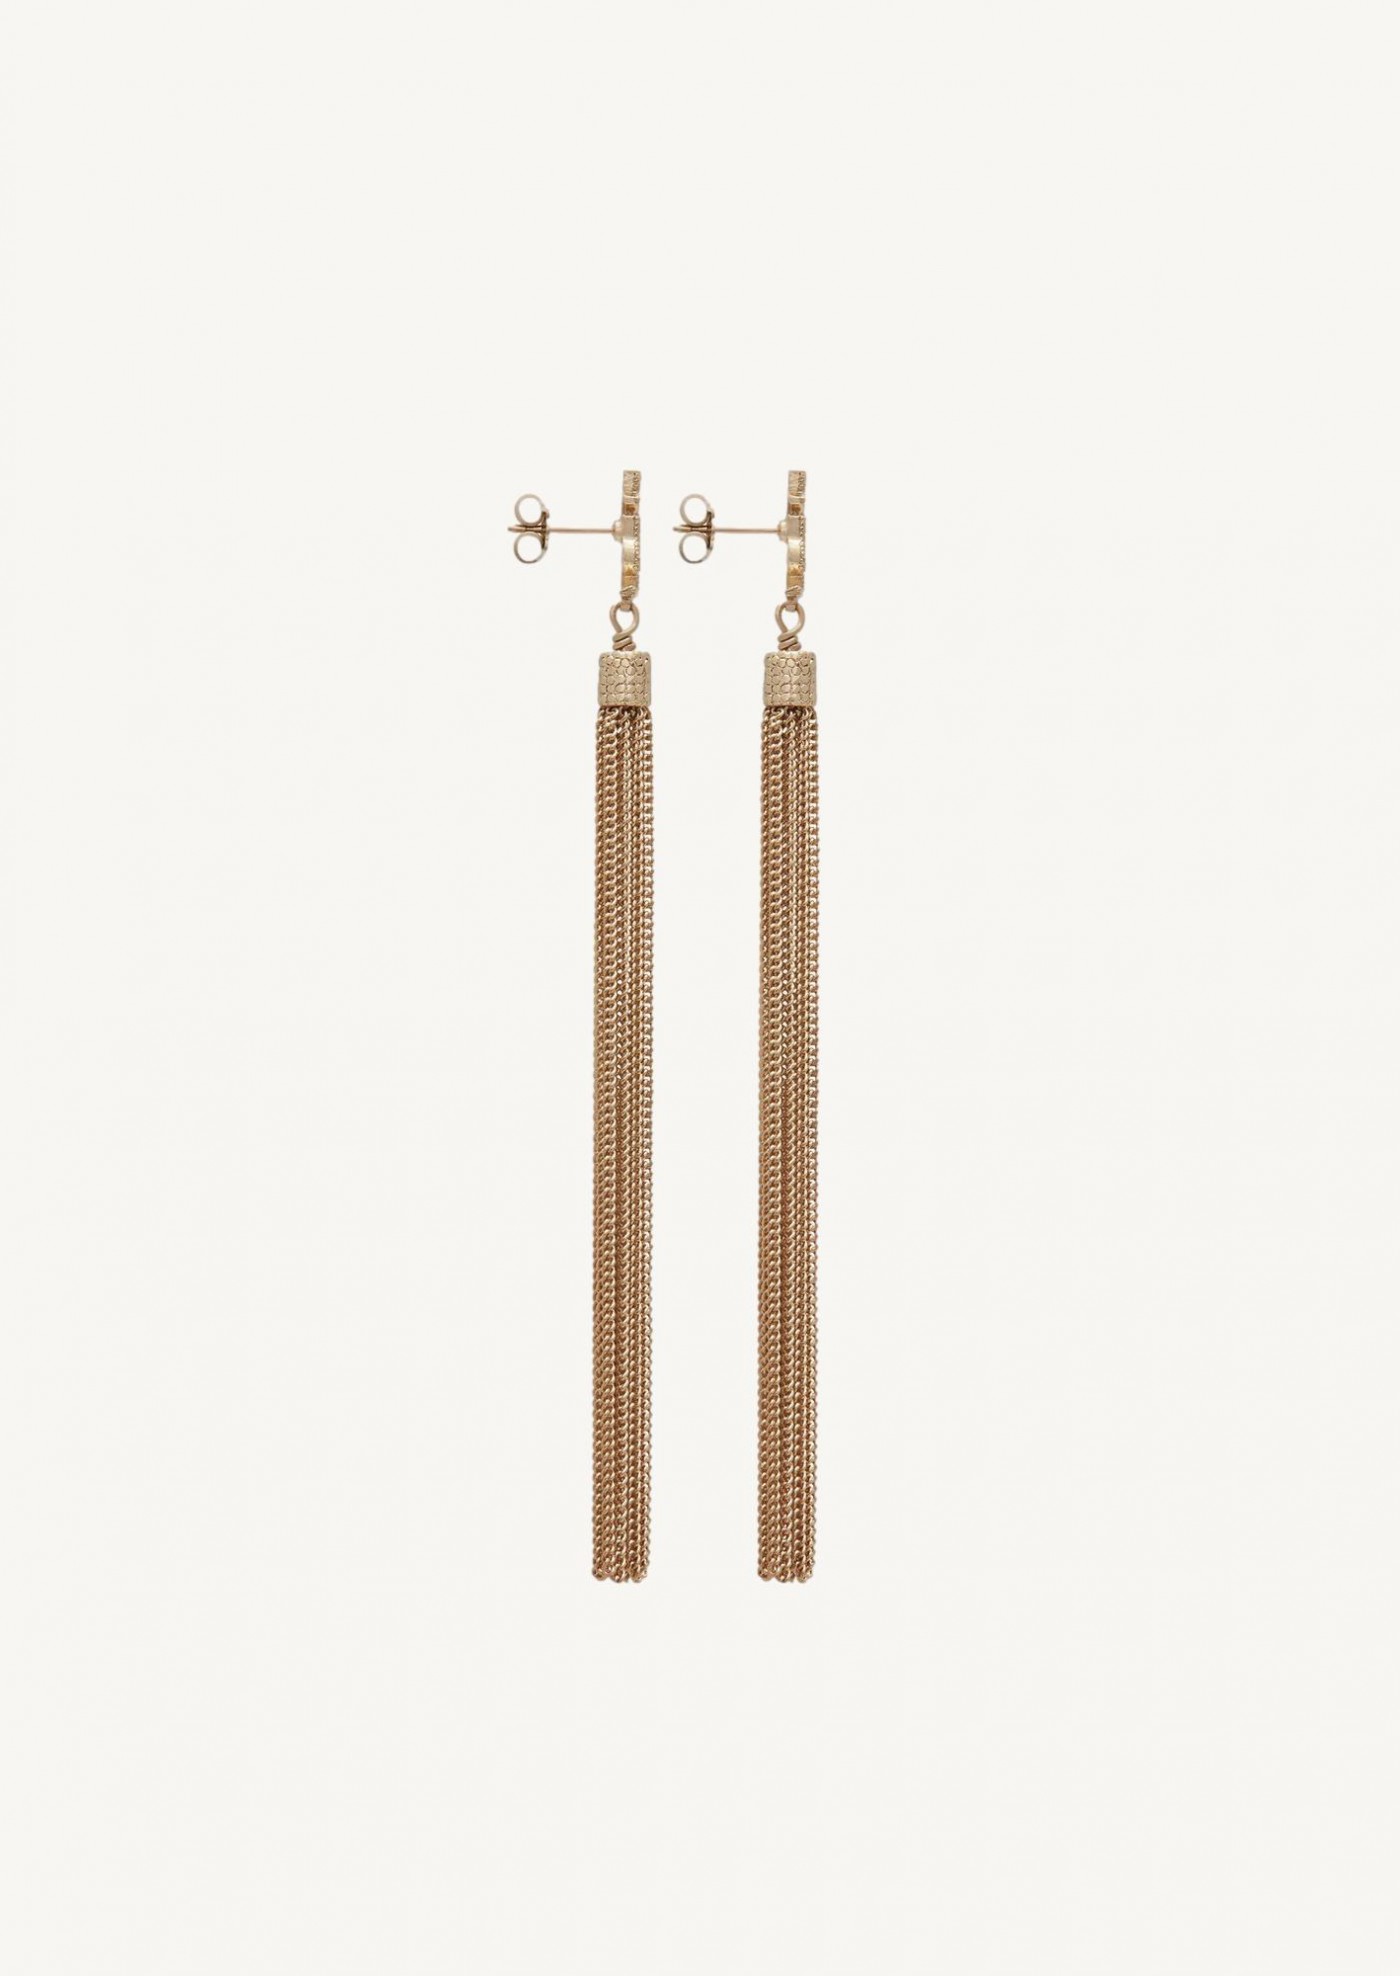 EARRINGS LOULOU WITH POMPOM CHAINS IN LIGHT GOLDEN BRASS